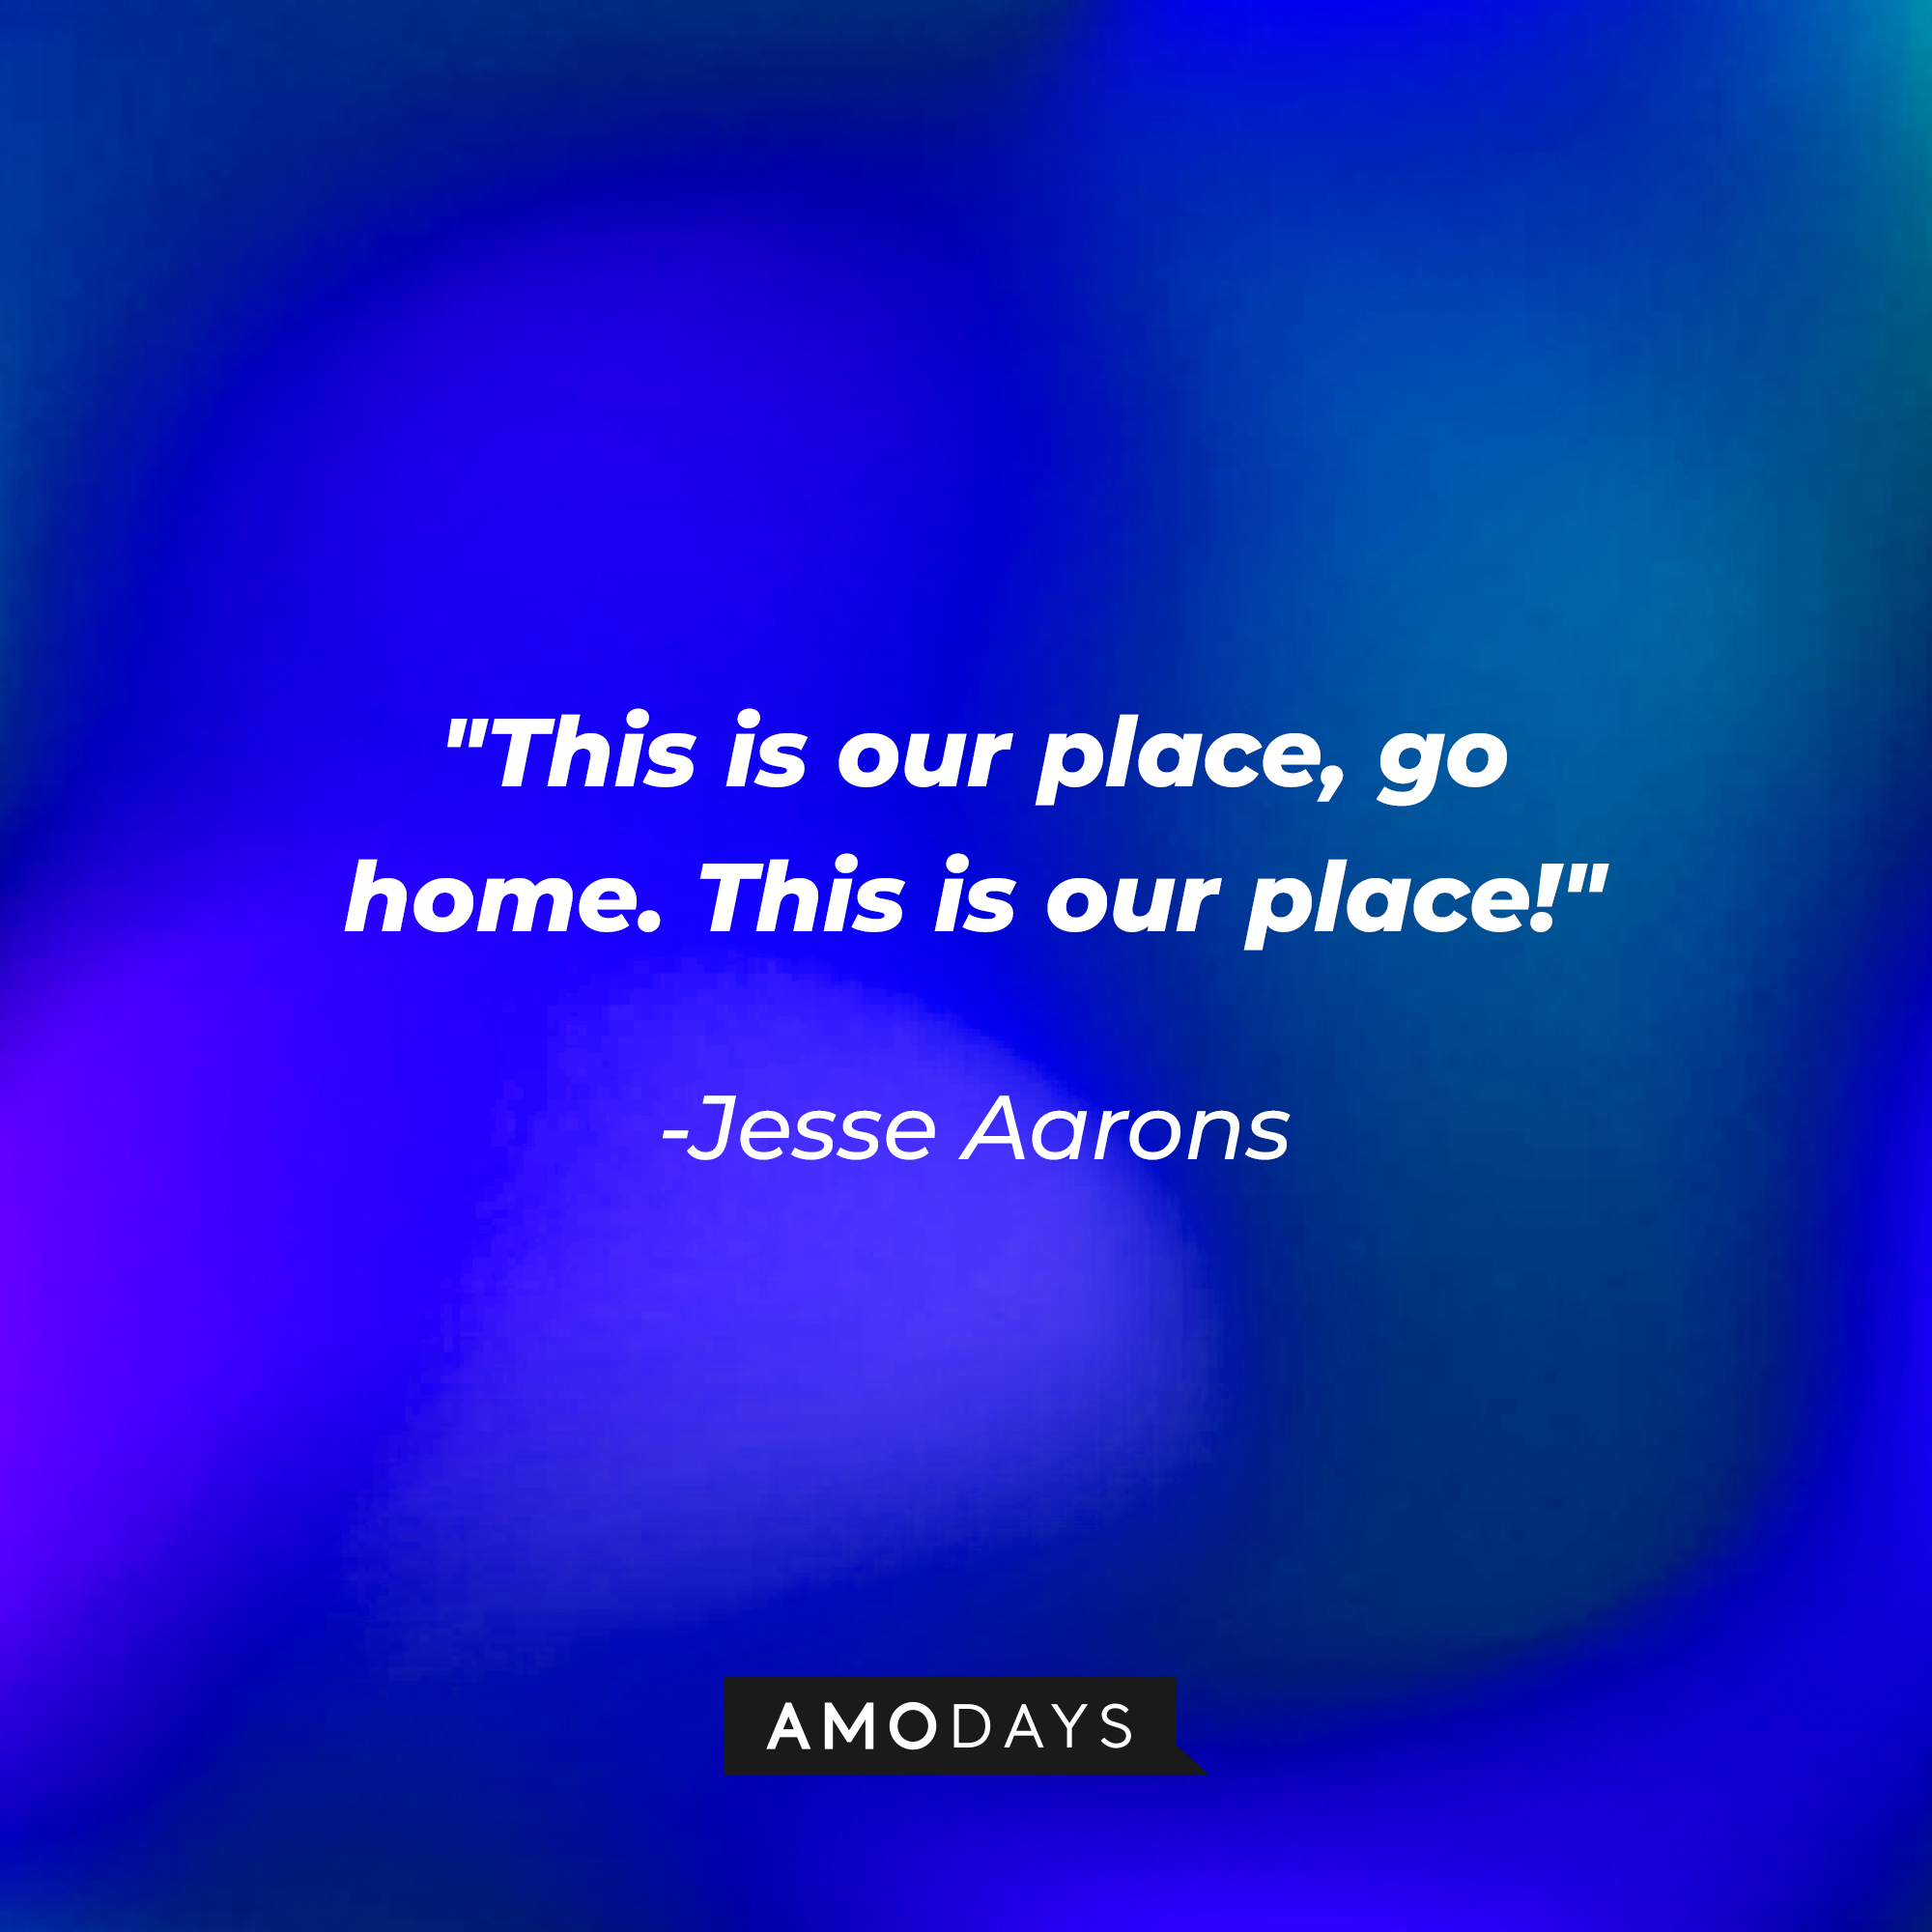 Jesse Aarons: "This is our place, go home. This is our place!" | Source: Amodays